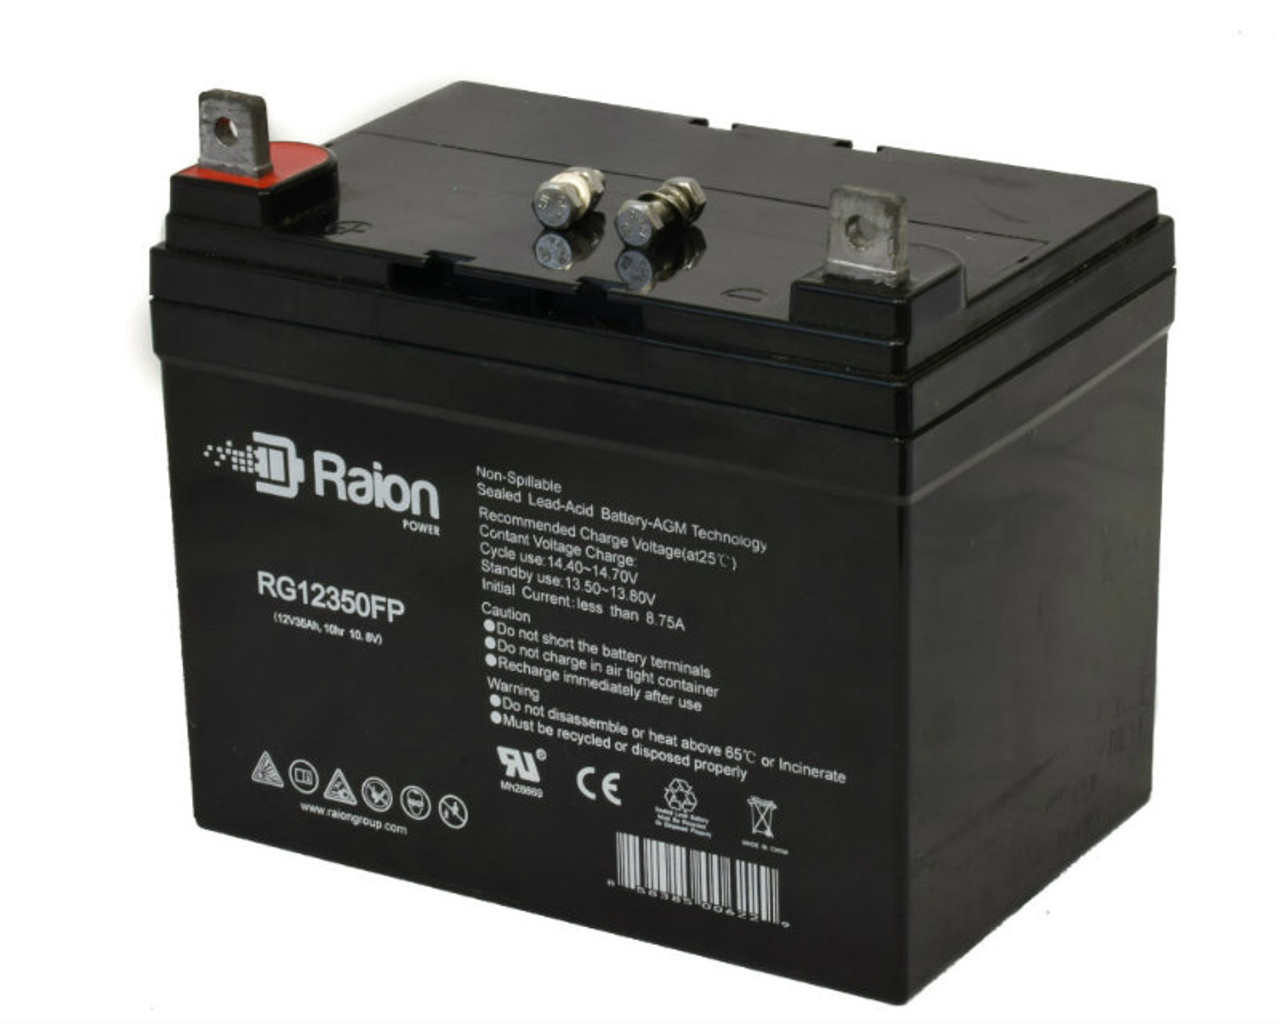 Raion Power Replacement 12V 35Ah RG12350FP Mobility Scooter Battery for Merits Health Products P31312 (Travel Ease Regal)